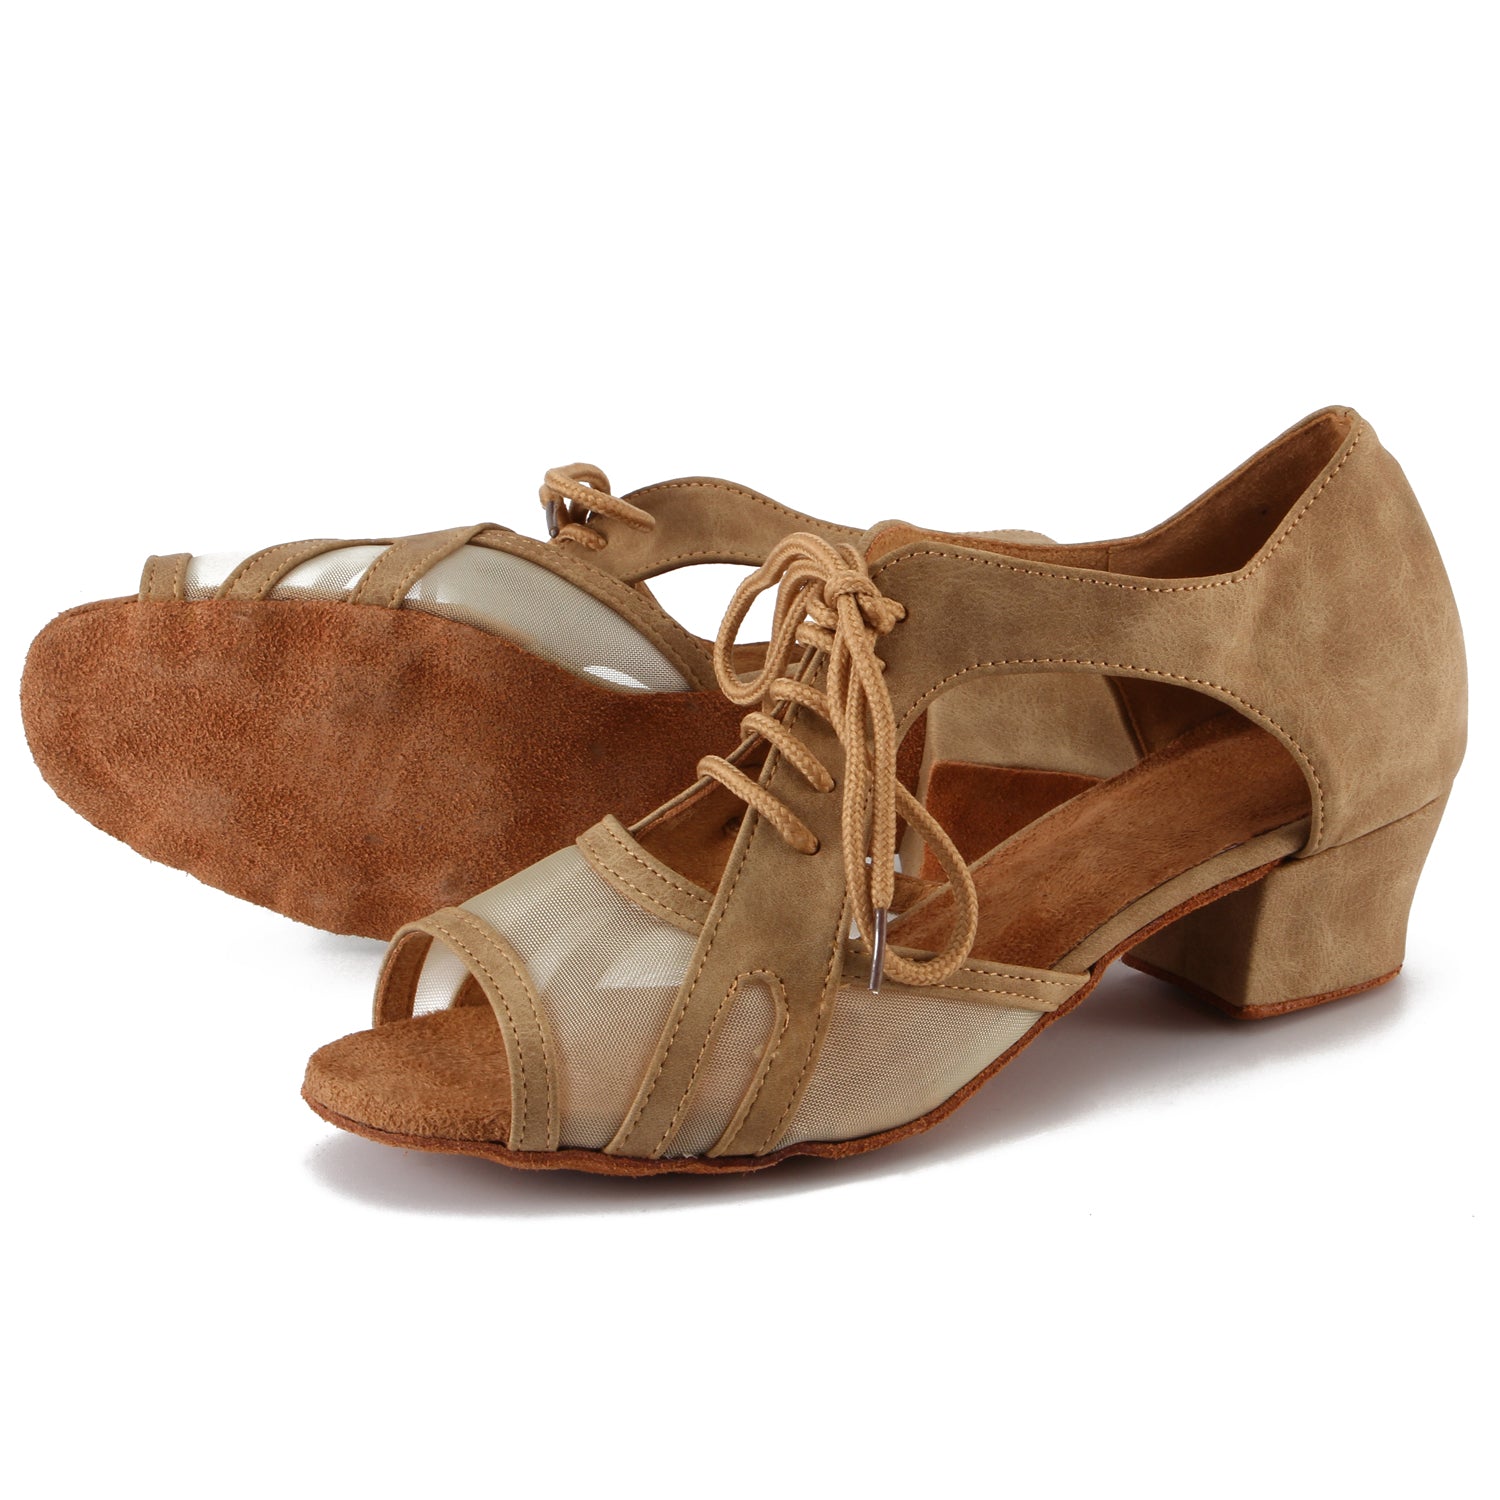 Women Ballroom Dancing Shoes with Suede Sole, Lace-up Open-toe Design in Brown for Tango Latin Practice (PD-3002B)1